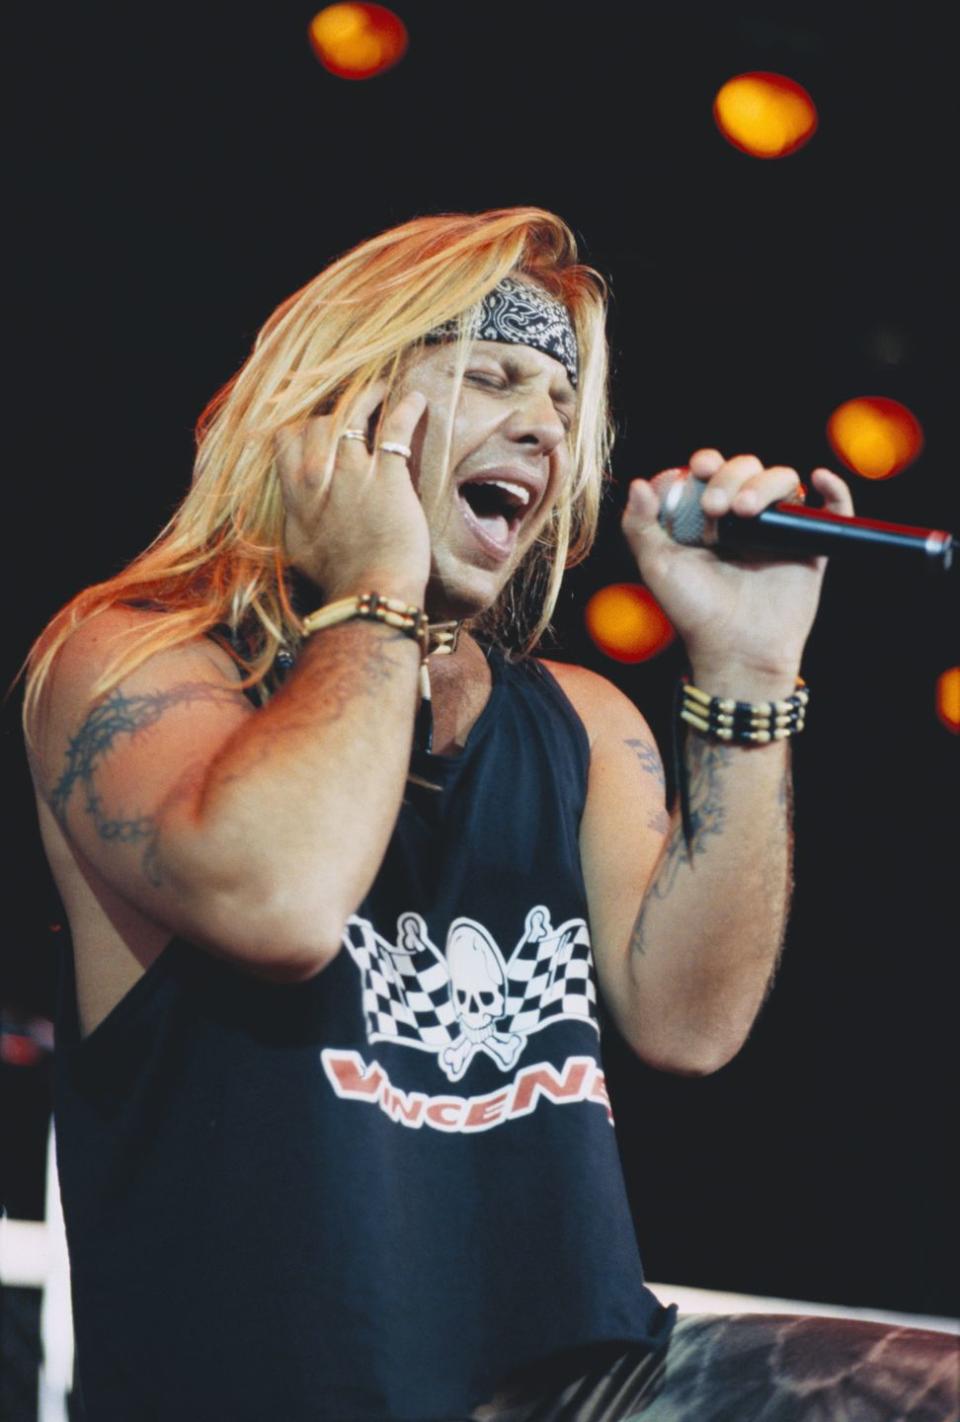 <p>Neil's first solo album, <em>Exposed</em>, was released in 1993 and debuted at No. 13 on the <em>Billboard</em> charts. By 1997, Neil's solo career and Mötley Crüe were struggling, so the band reunited.</p>